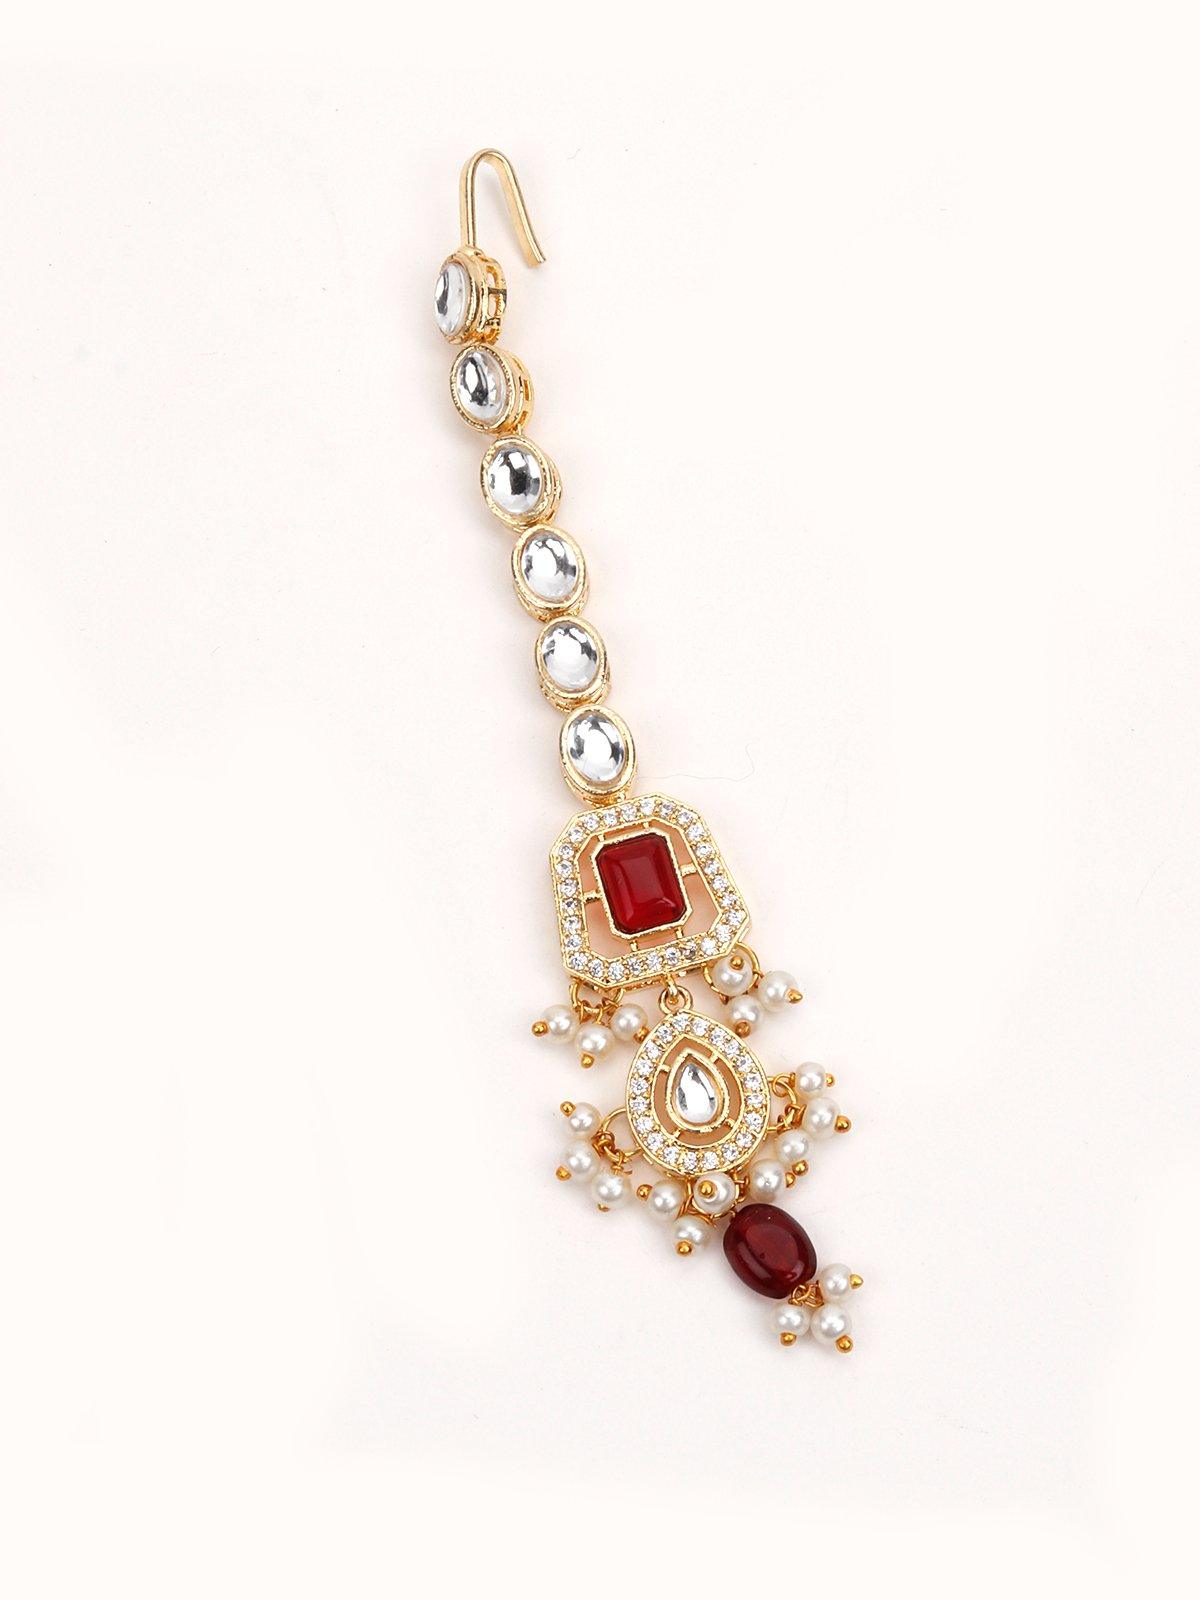 Women's Ethnic Red & Gold Necklace - Odette